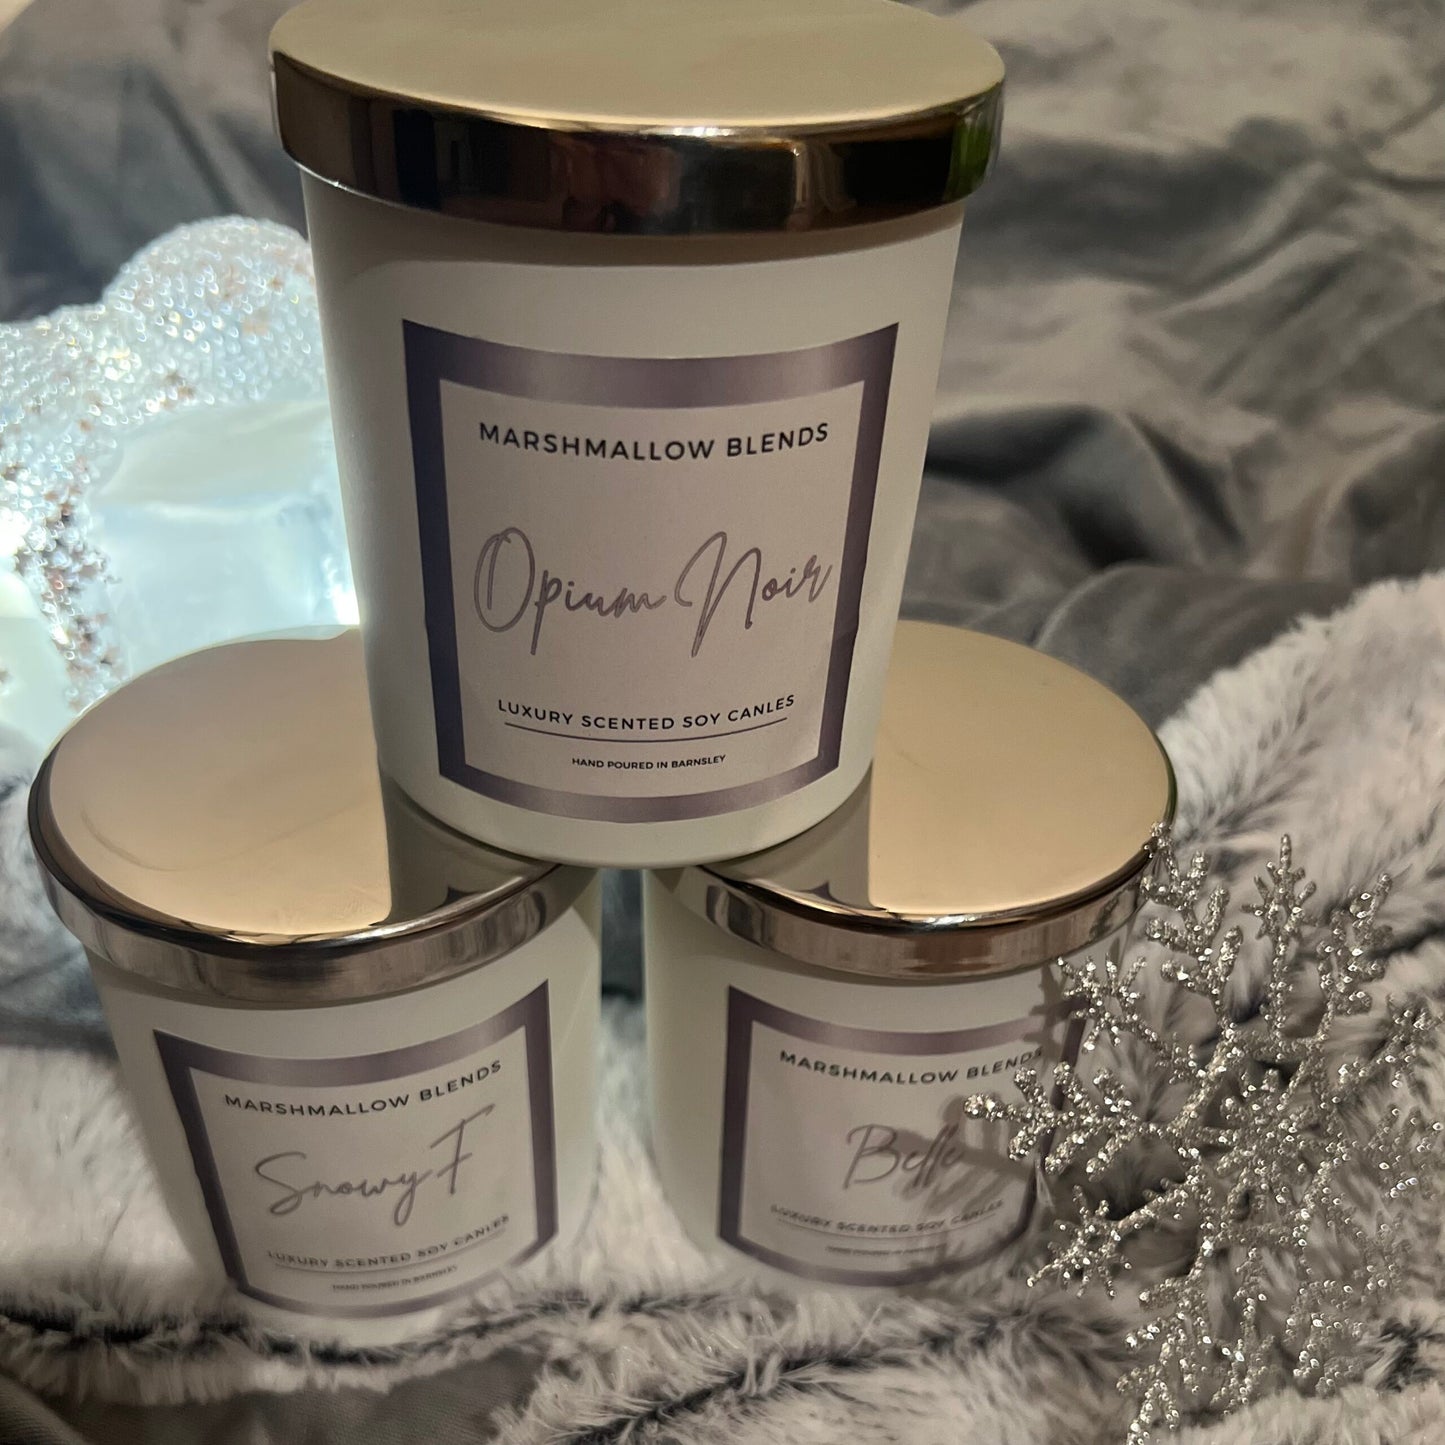 Mr Grey Marshmallow Blends Candle